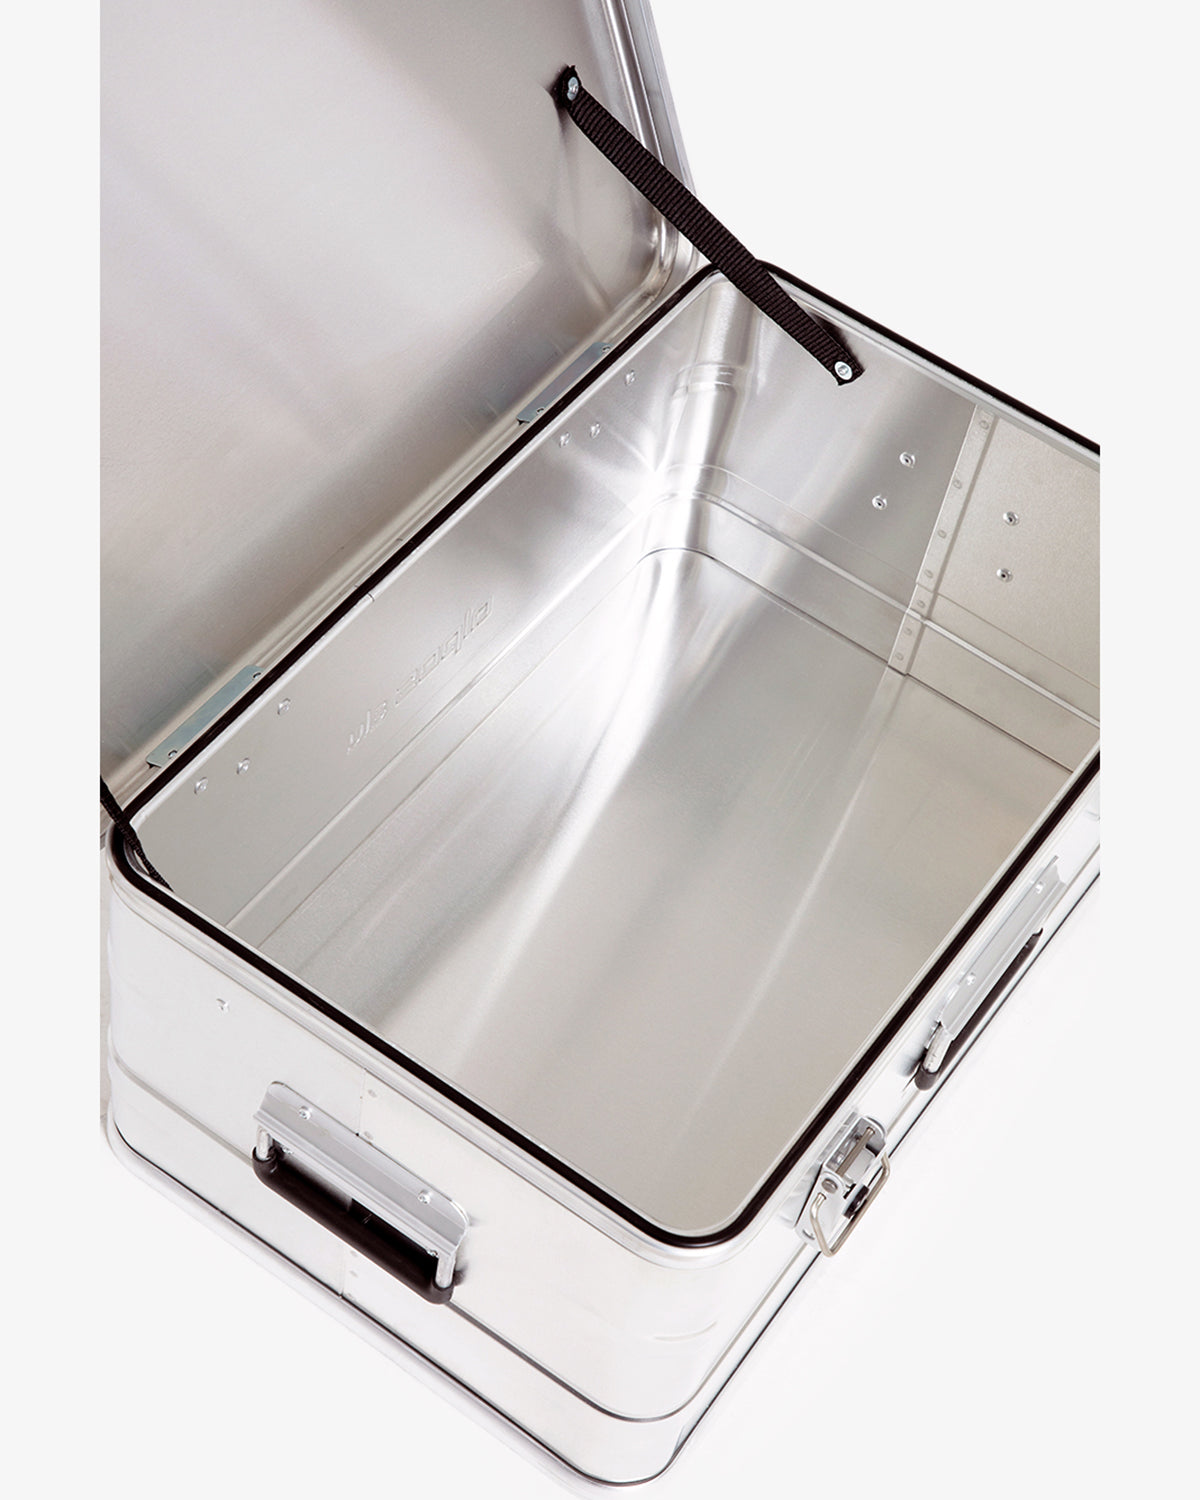 ALPOS ALUMI CONTAINER WITH LID - S